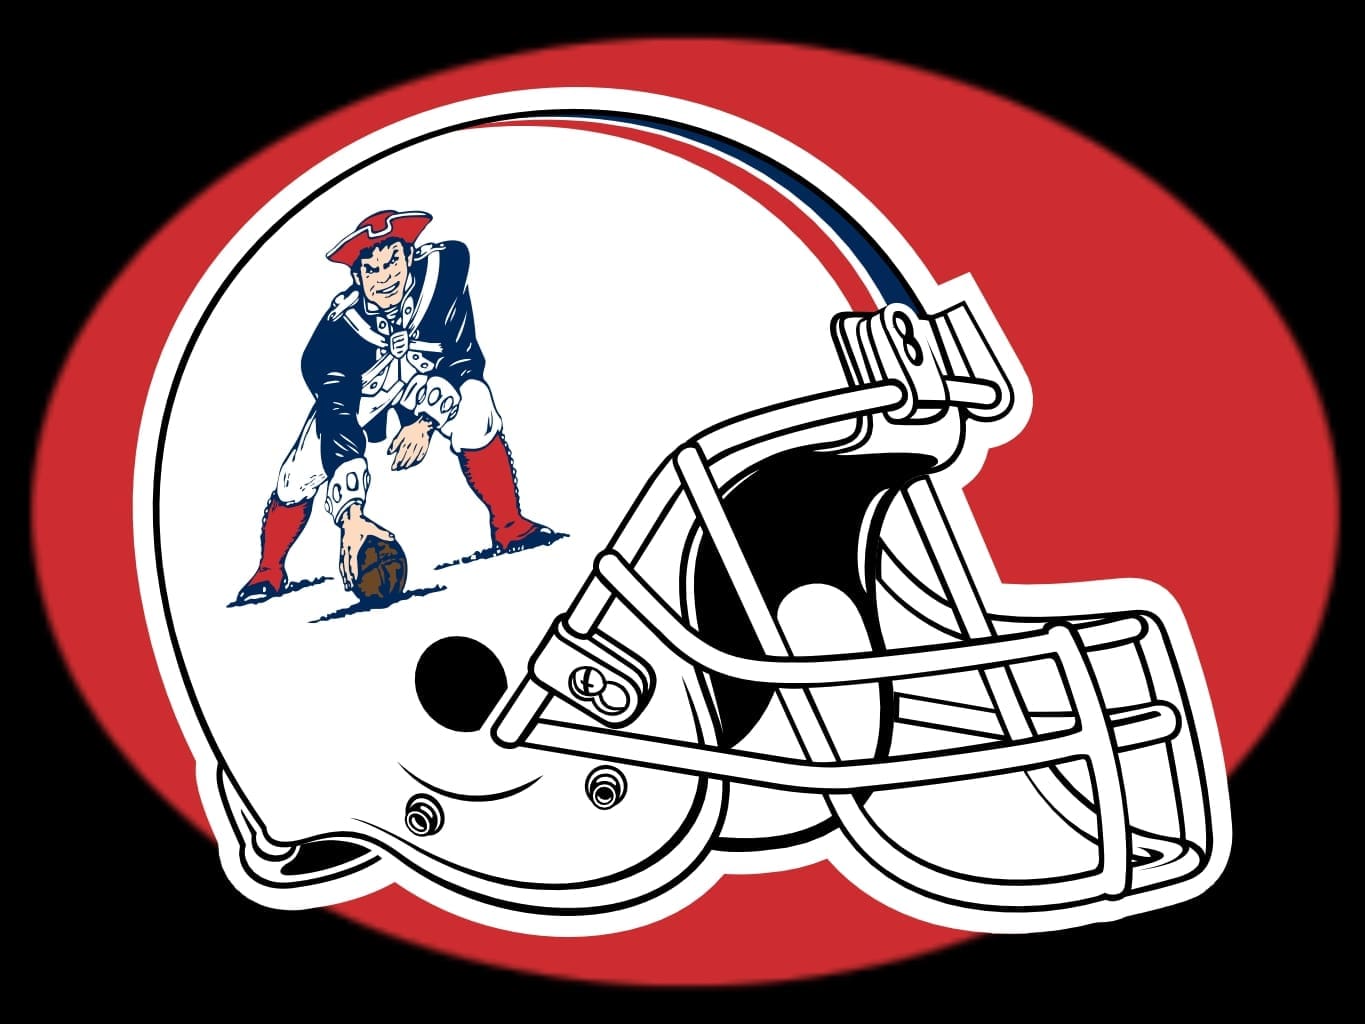 Clipart of New England Patriots Old Logo image in Vector cliparts category at pixy.org